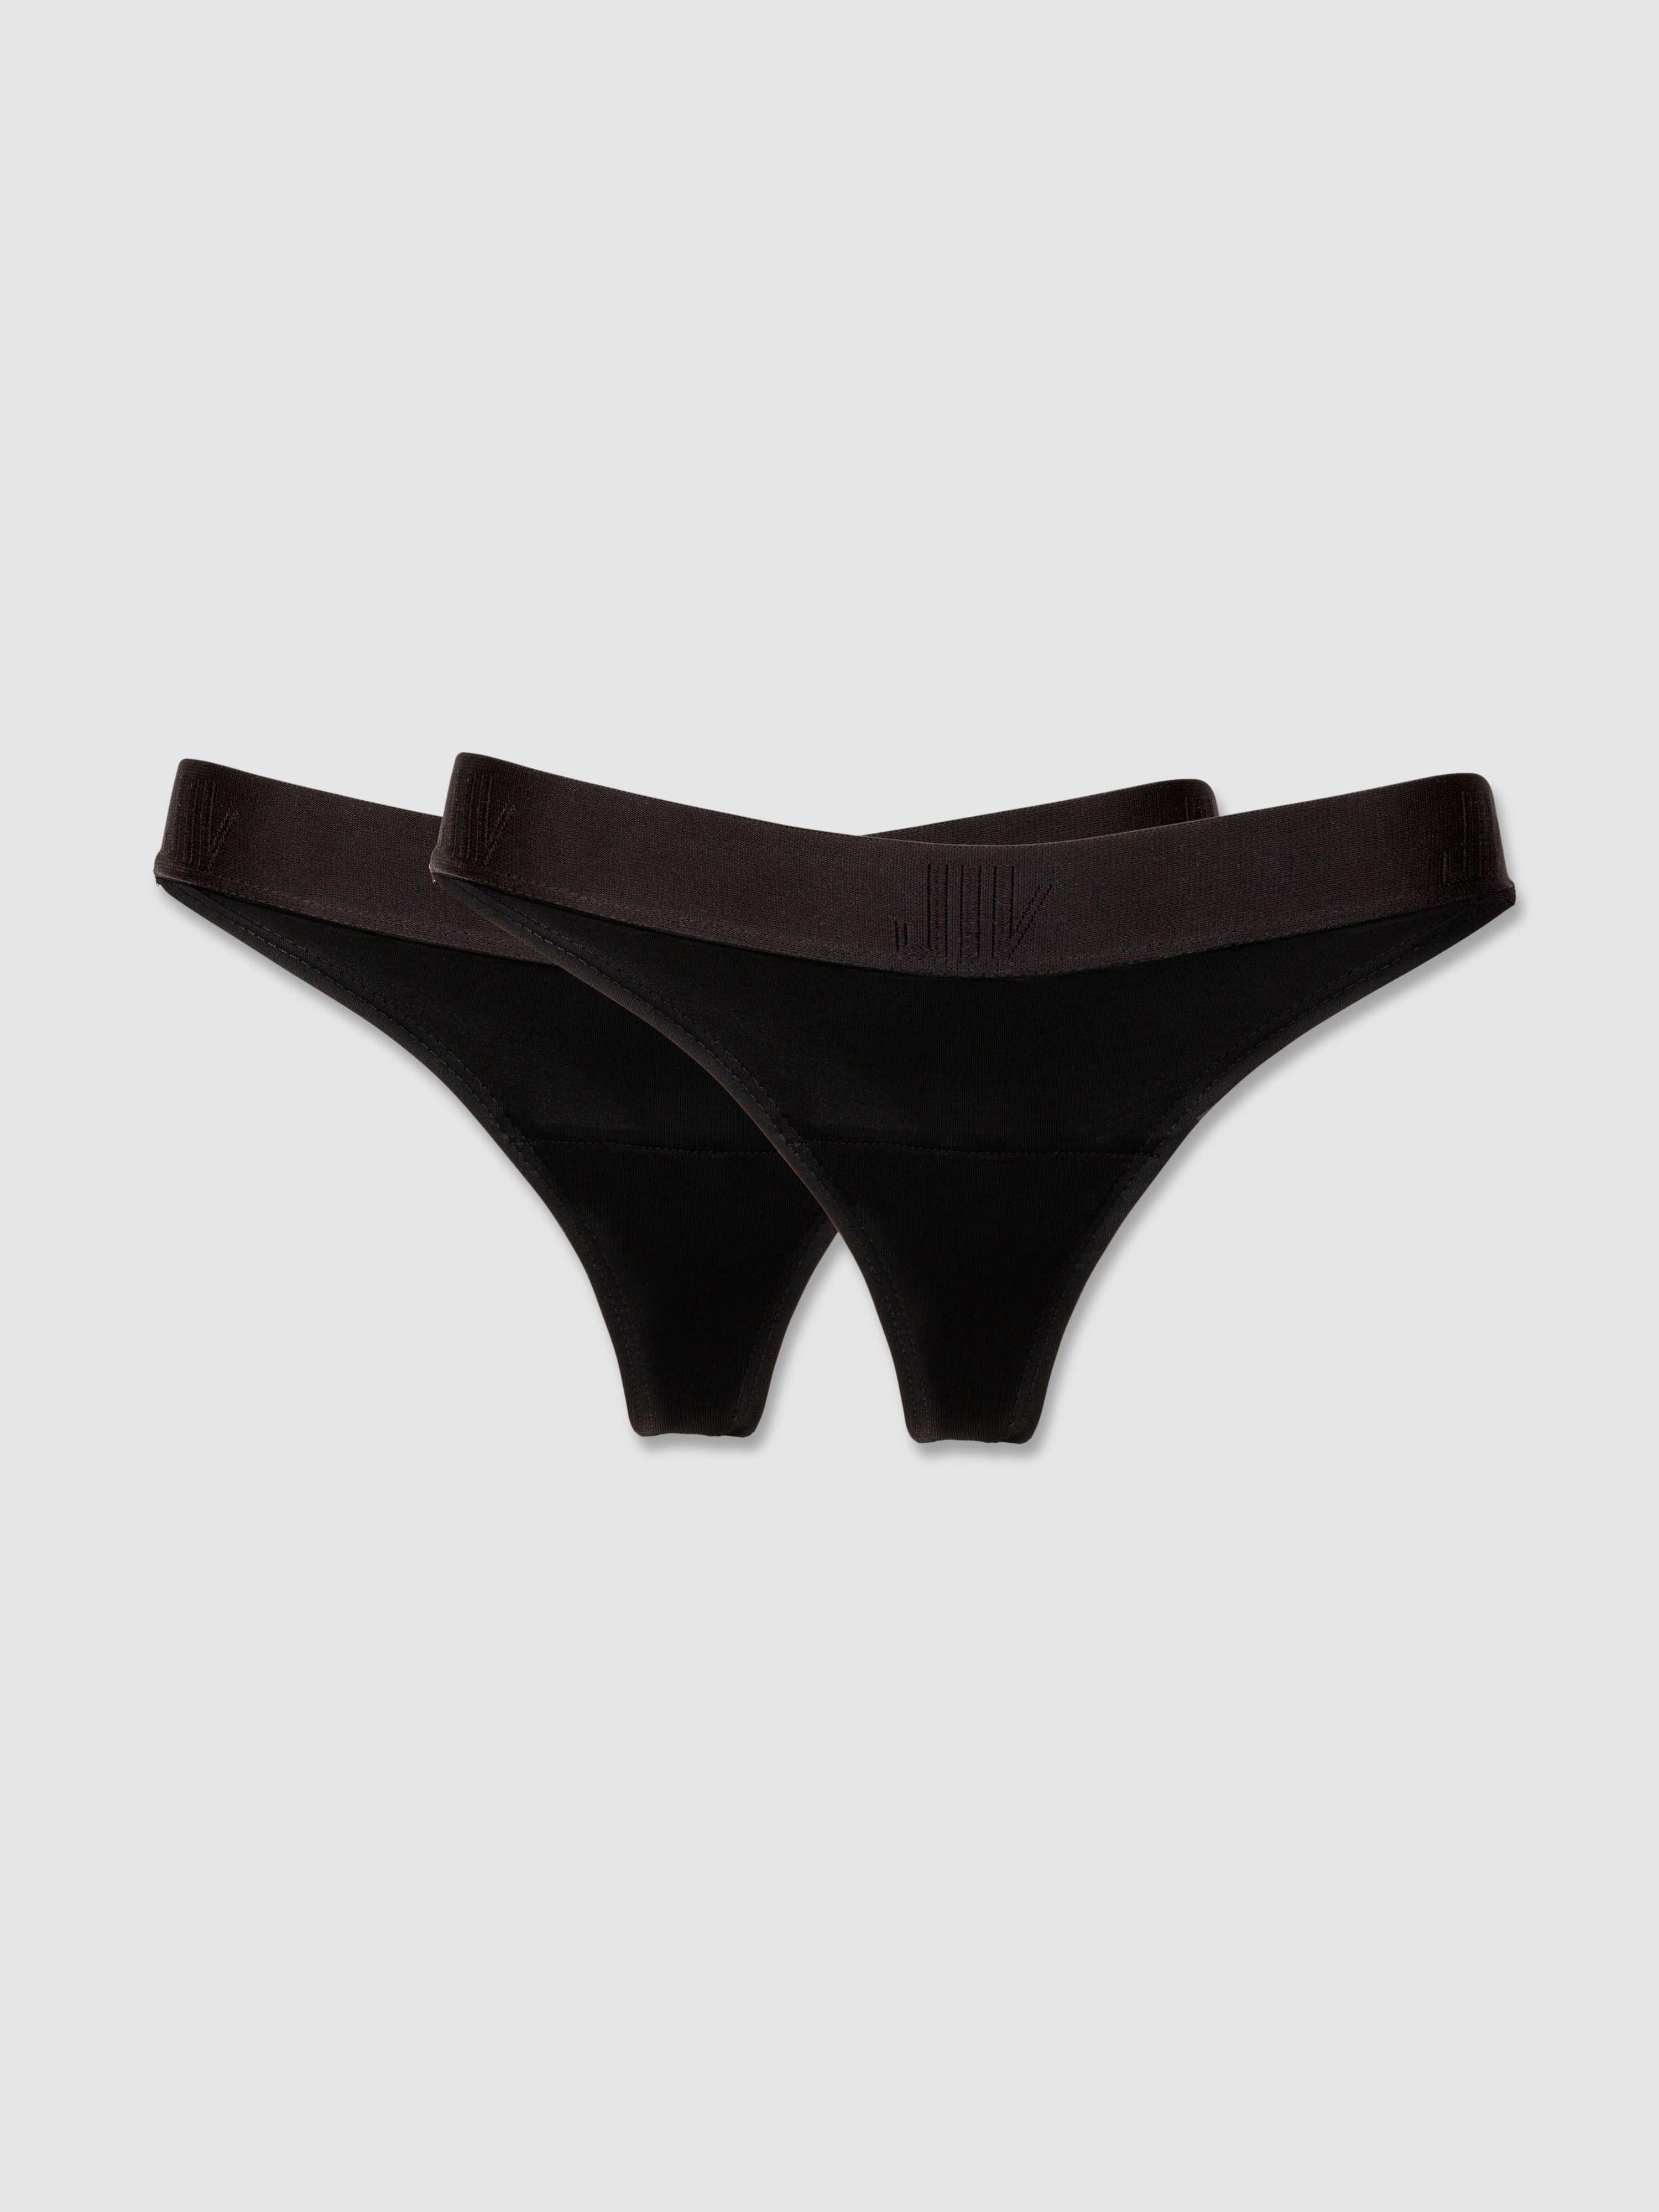 Jiv Athletics Cameltoe Proof Low Rise Thong (x2) In Black | ModeSens